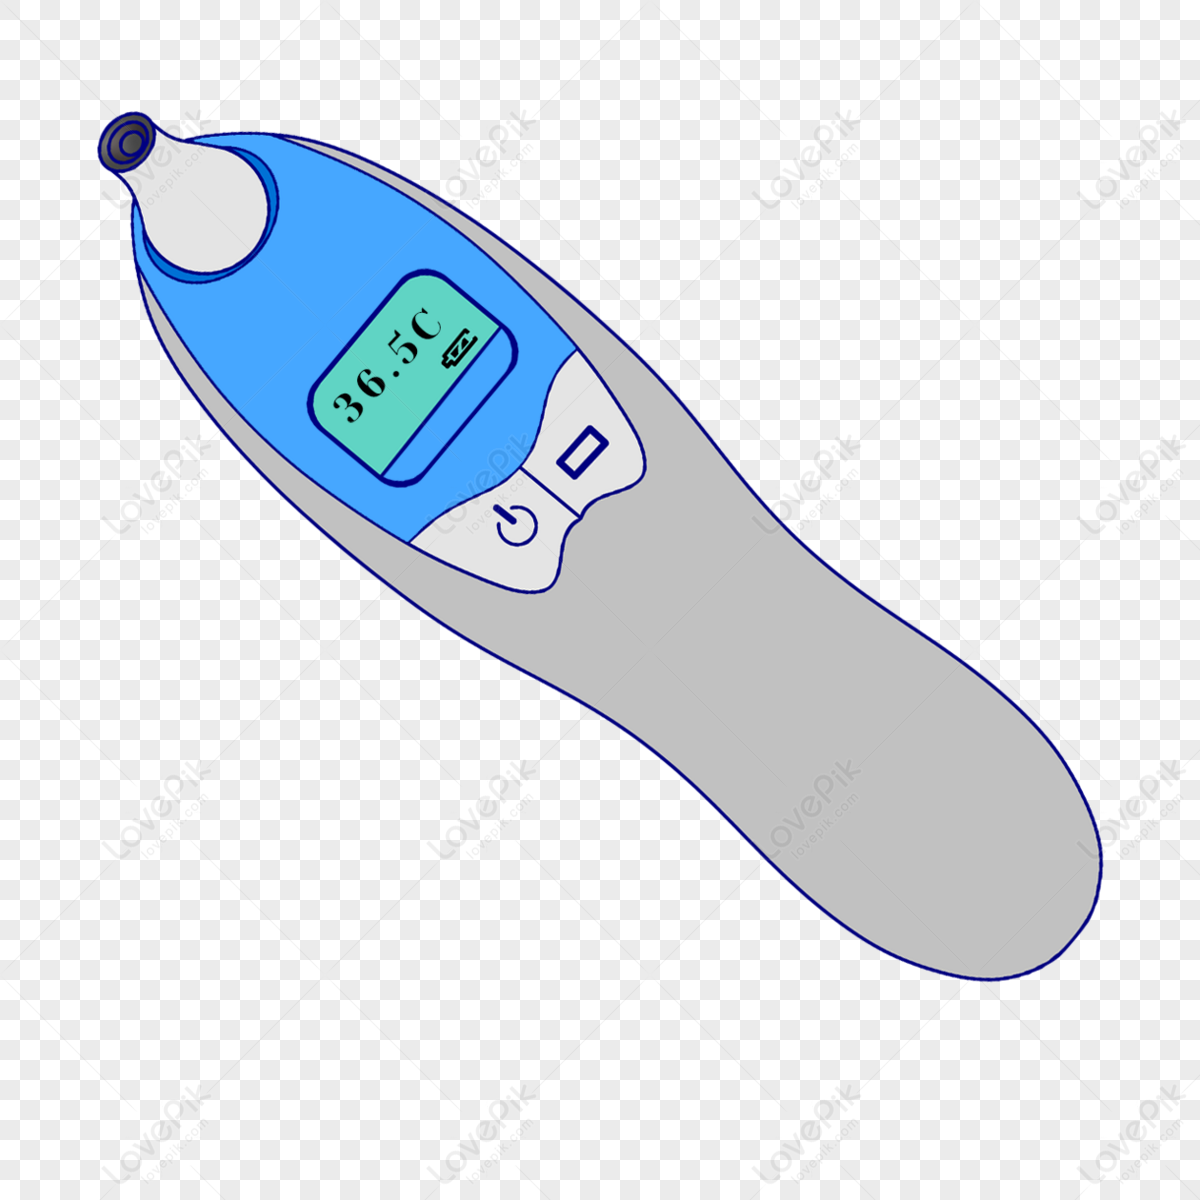 Earth Drawing With Clinical Thermometer Stock Photo - Download Image Now -  Fridays for Future, Arid Climate, Art - iStock